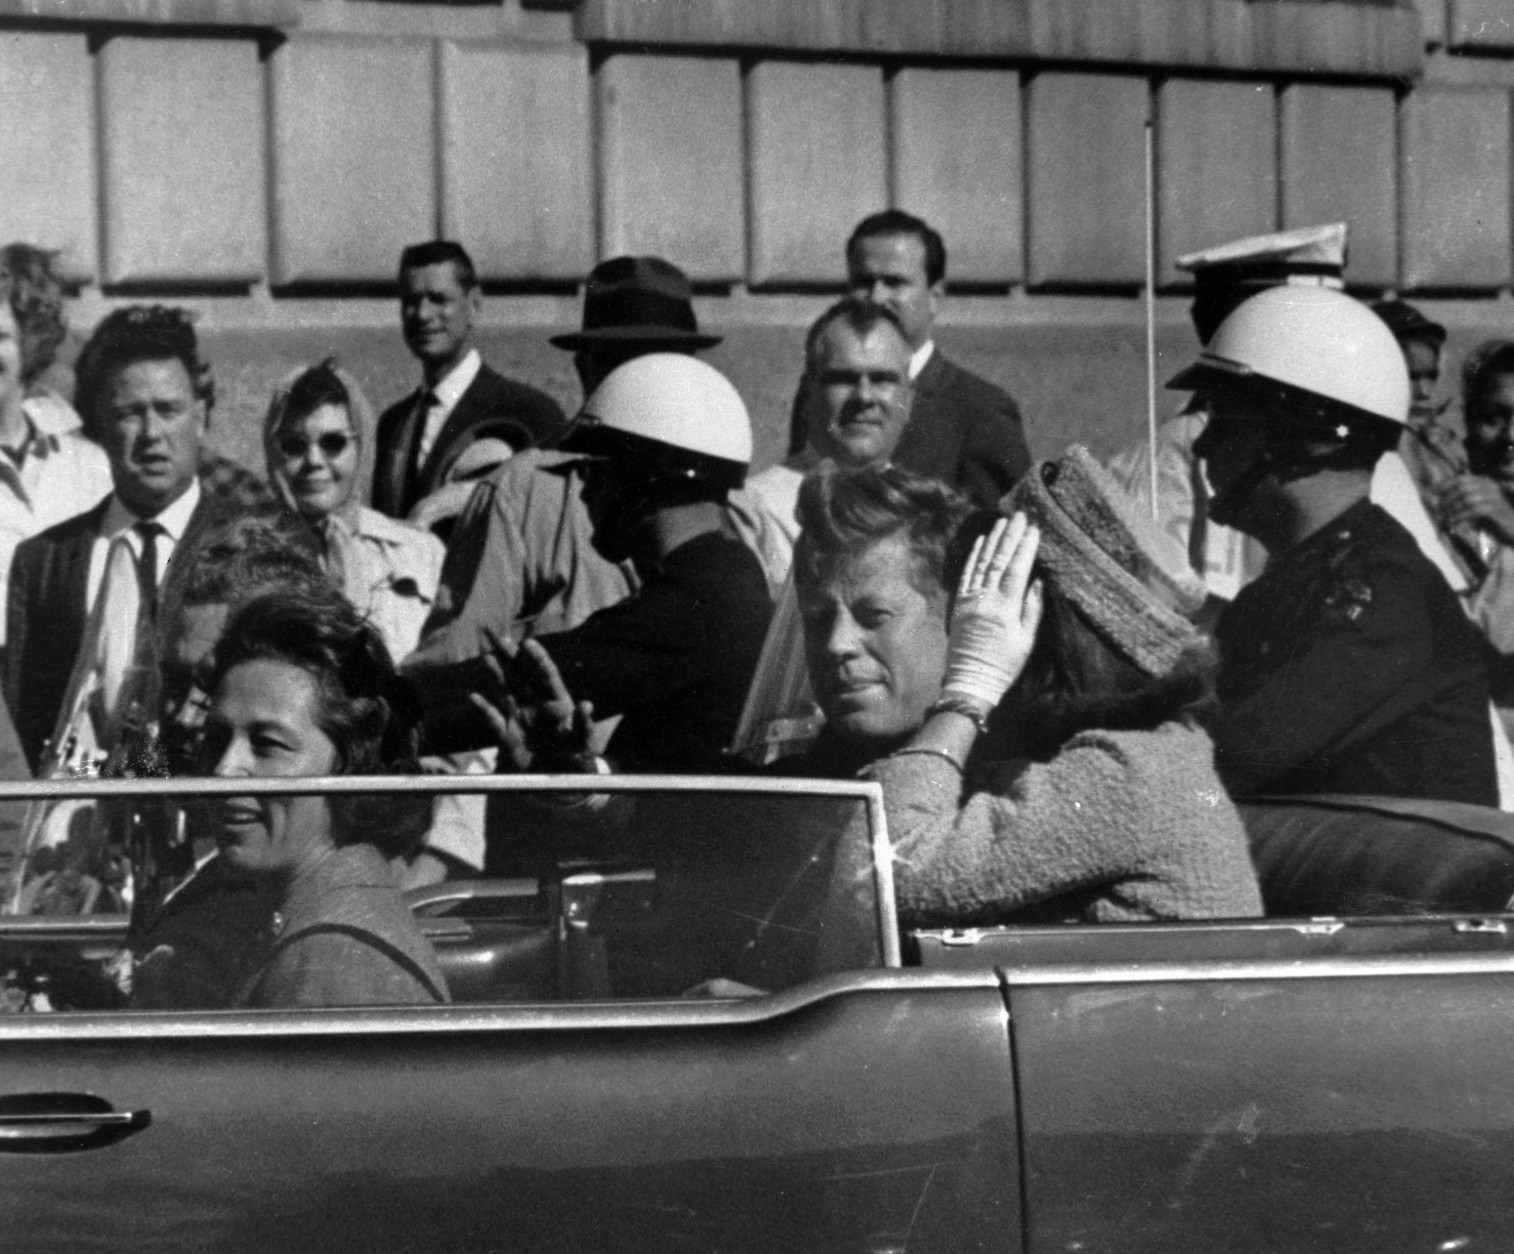 President John F. Kennedy is seen riding in motorcade approximately one minute before he was shot in Dallas, Tx., on Nov. 22, 1963.  In the car riding with Kennedy are Mrs. Jacqueline Kennedy, right, Nellie Connally, left, and her husband, Gov. John Connally of Texas.  (AP Photo/Jim Altgens)